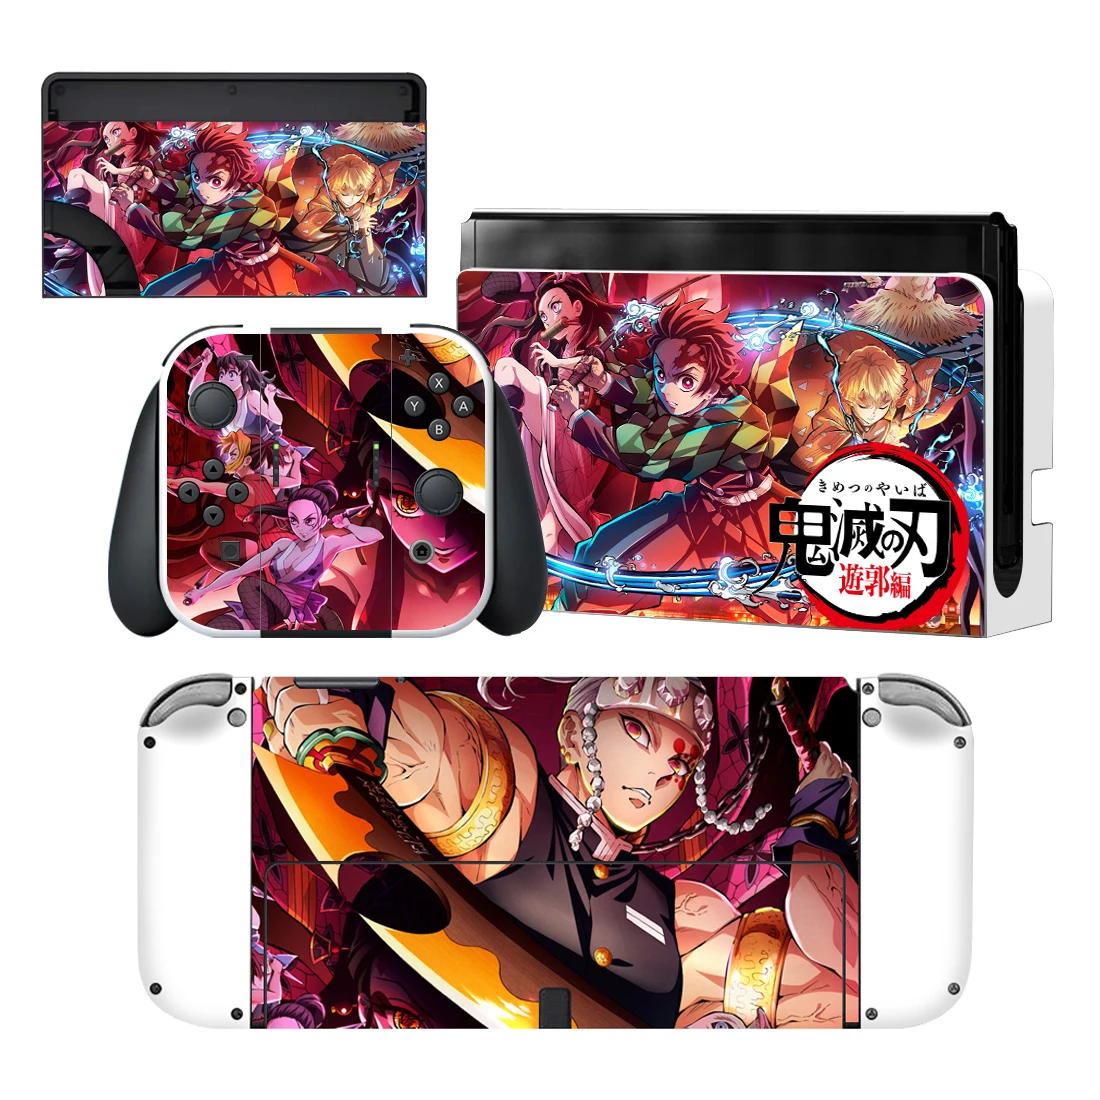 Demon Slayer Nintendoswitch Skin Cover Sticker Decal for Nintendo Switch OLED Console Joy-con Controller Dock Skin Vinyl images - 6